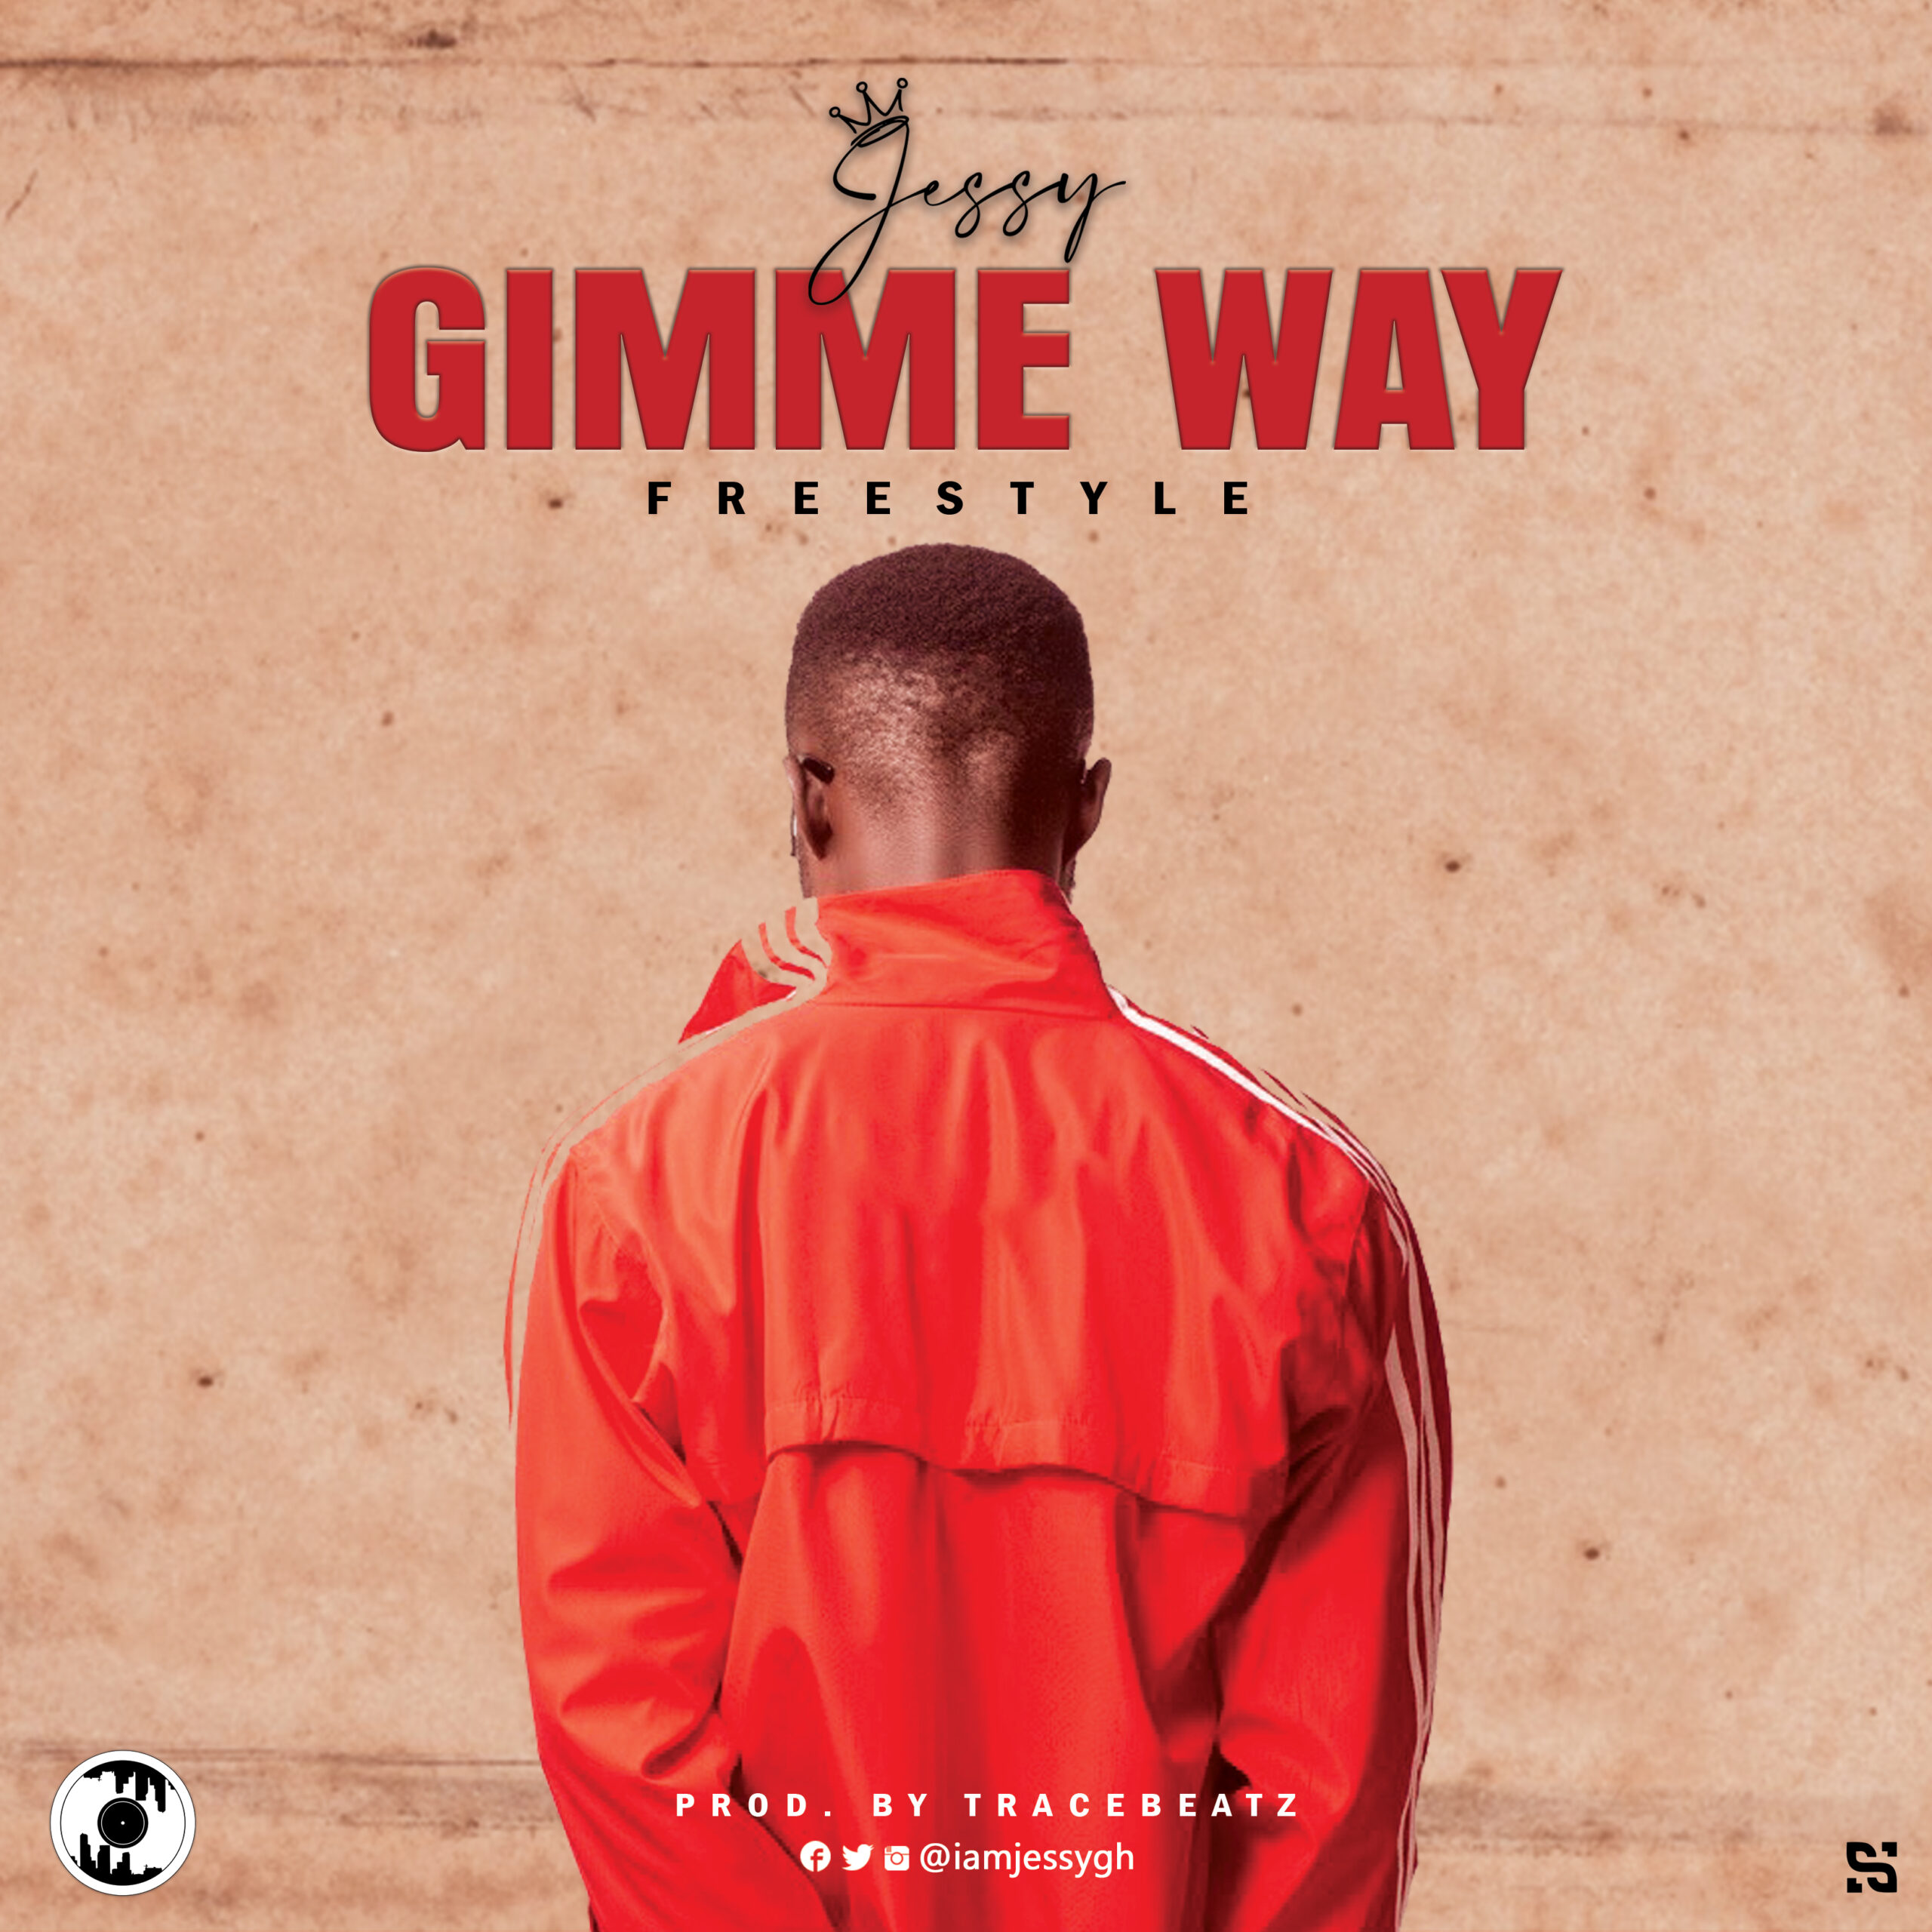 An award-winning Ghanaian rap artiste, Jessy Gh, defending rap and hiplife music from his locality who is also well known for his versatility and pen game has released a brand new freestyle song titled ‘Gimme Way’. The rapper has some unique attributes and that would definitely be his voice/vocal texture and his groovy nature of his sound. ‘Gimme Way’ is motivational and a way paving message to his listeners and the world as Jessy GH projects the idea of not really being concerned about the pull him down attitude or the hardship he faces but will rather push harder and pave way for his forthcoming EP Apple & Rose. Jessy Gh got crowned as the Highlife Artiste of the year at Youth Empowerment Awards 2020 due to his versatility. He was nominated for the Volta Music Awards as the Best Rapper of the Year, Songwriter of the Year, Hip-hop Song of the Year, and Popular Song of the Year.